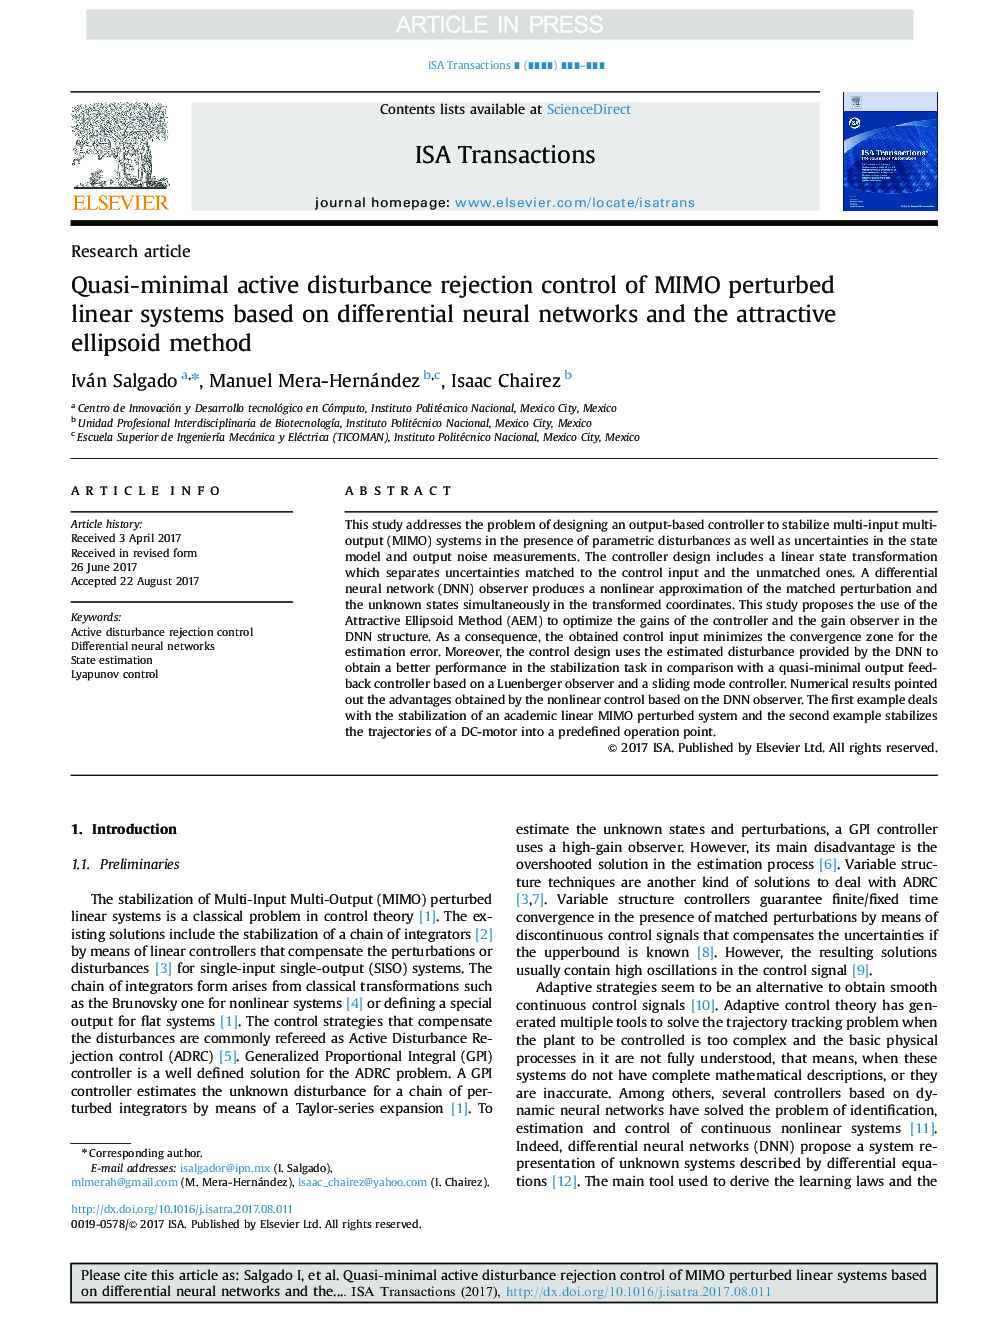 Quasi-minimal active disturbance rejection control of MIMO perturbed linear systems based on differential neural networks and the attractive ellipsoid method